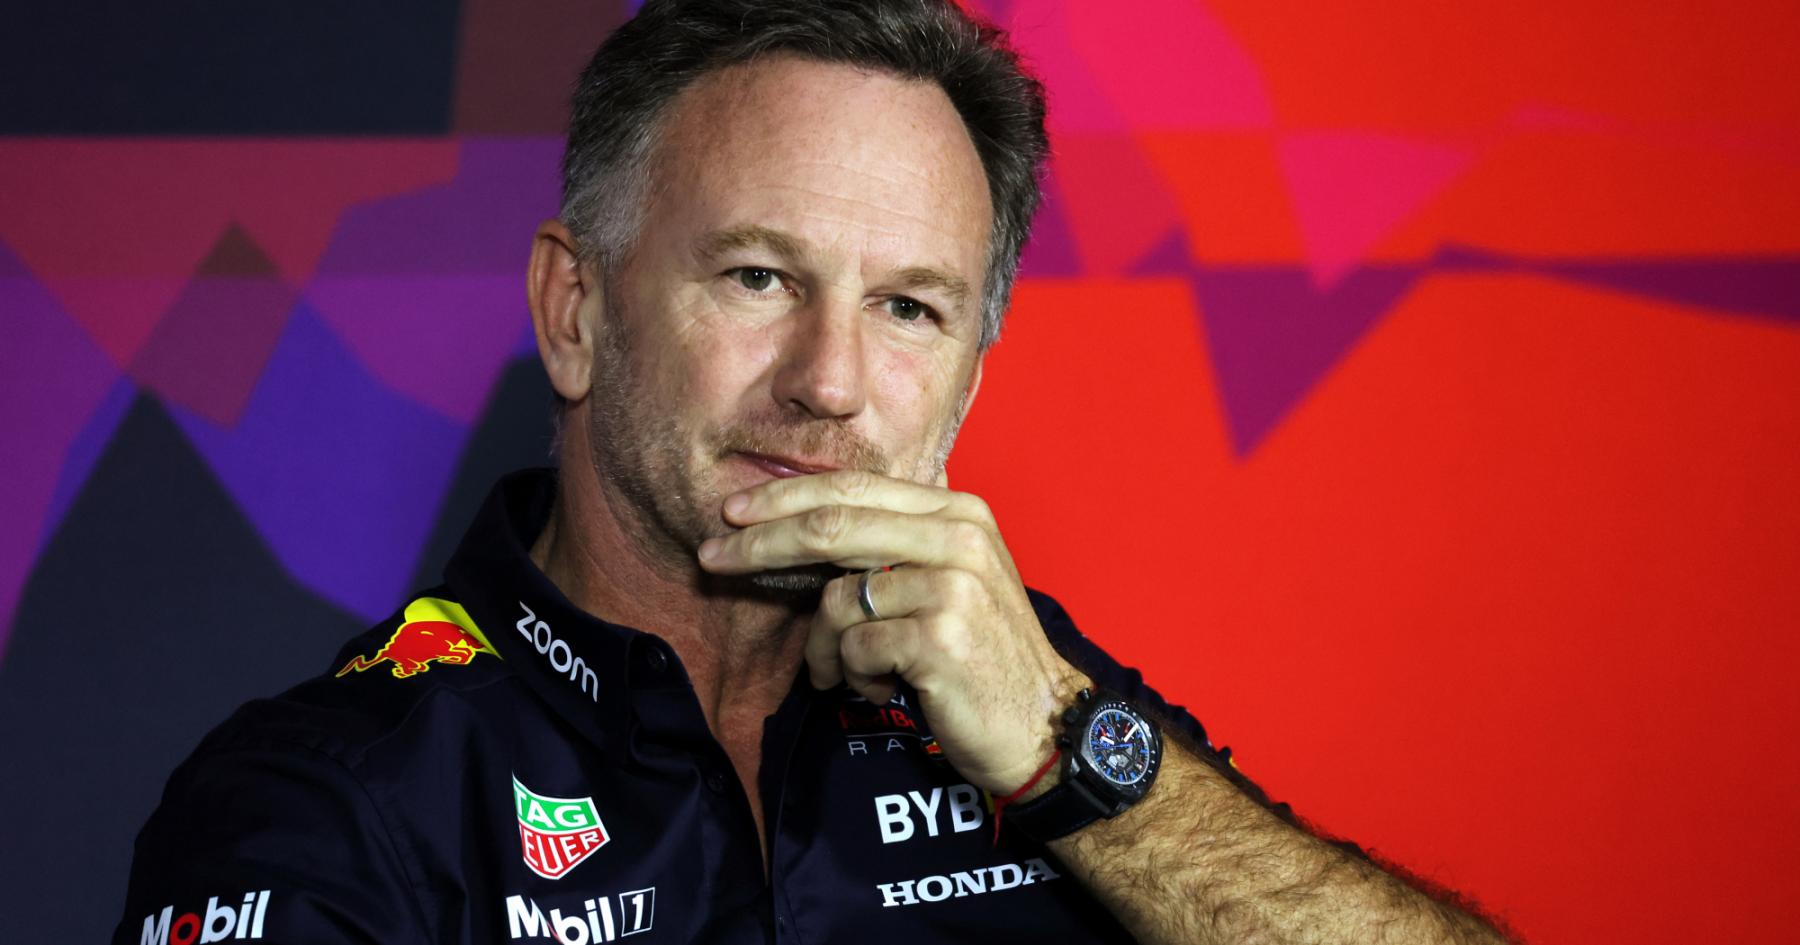 The Race for Justice: Horner's Unwavering Defense Amid Suspended Accusations - A RacingNews365 Exclusive